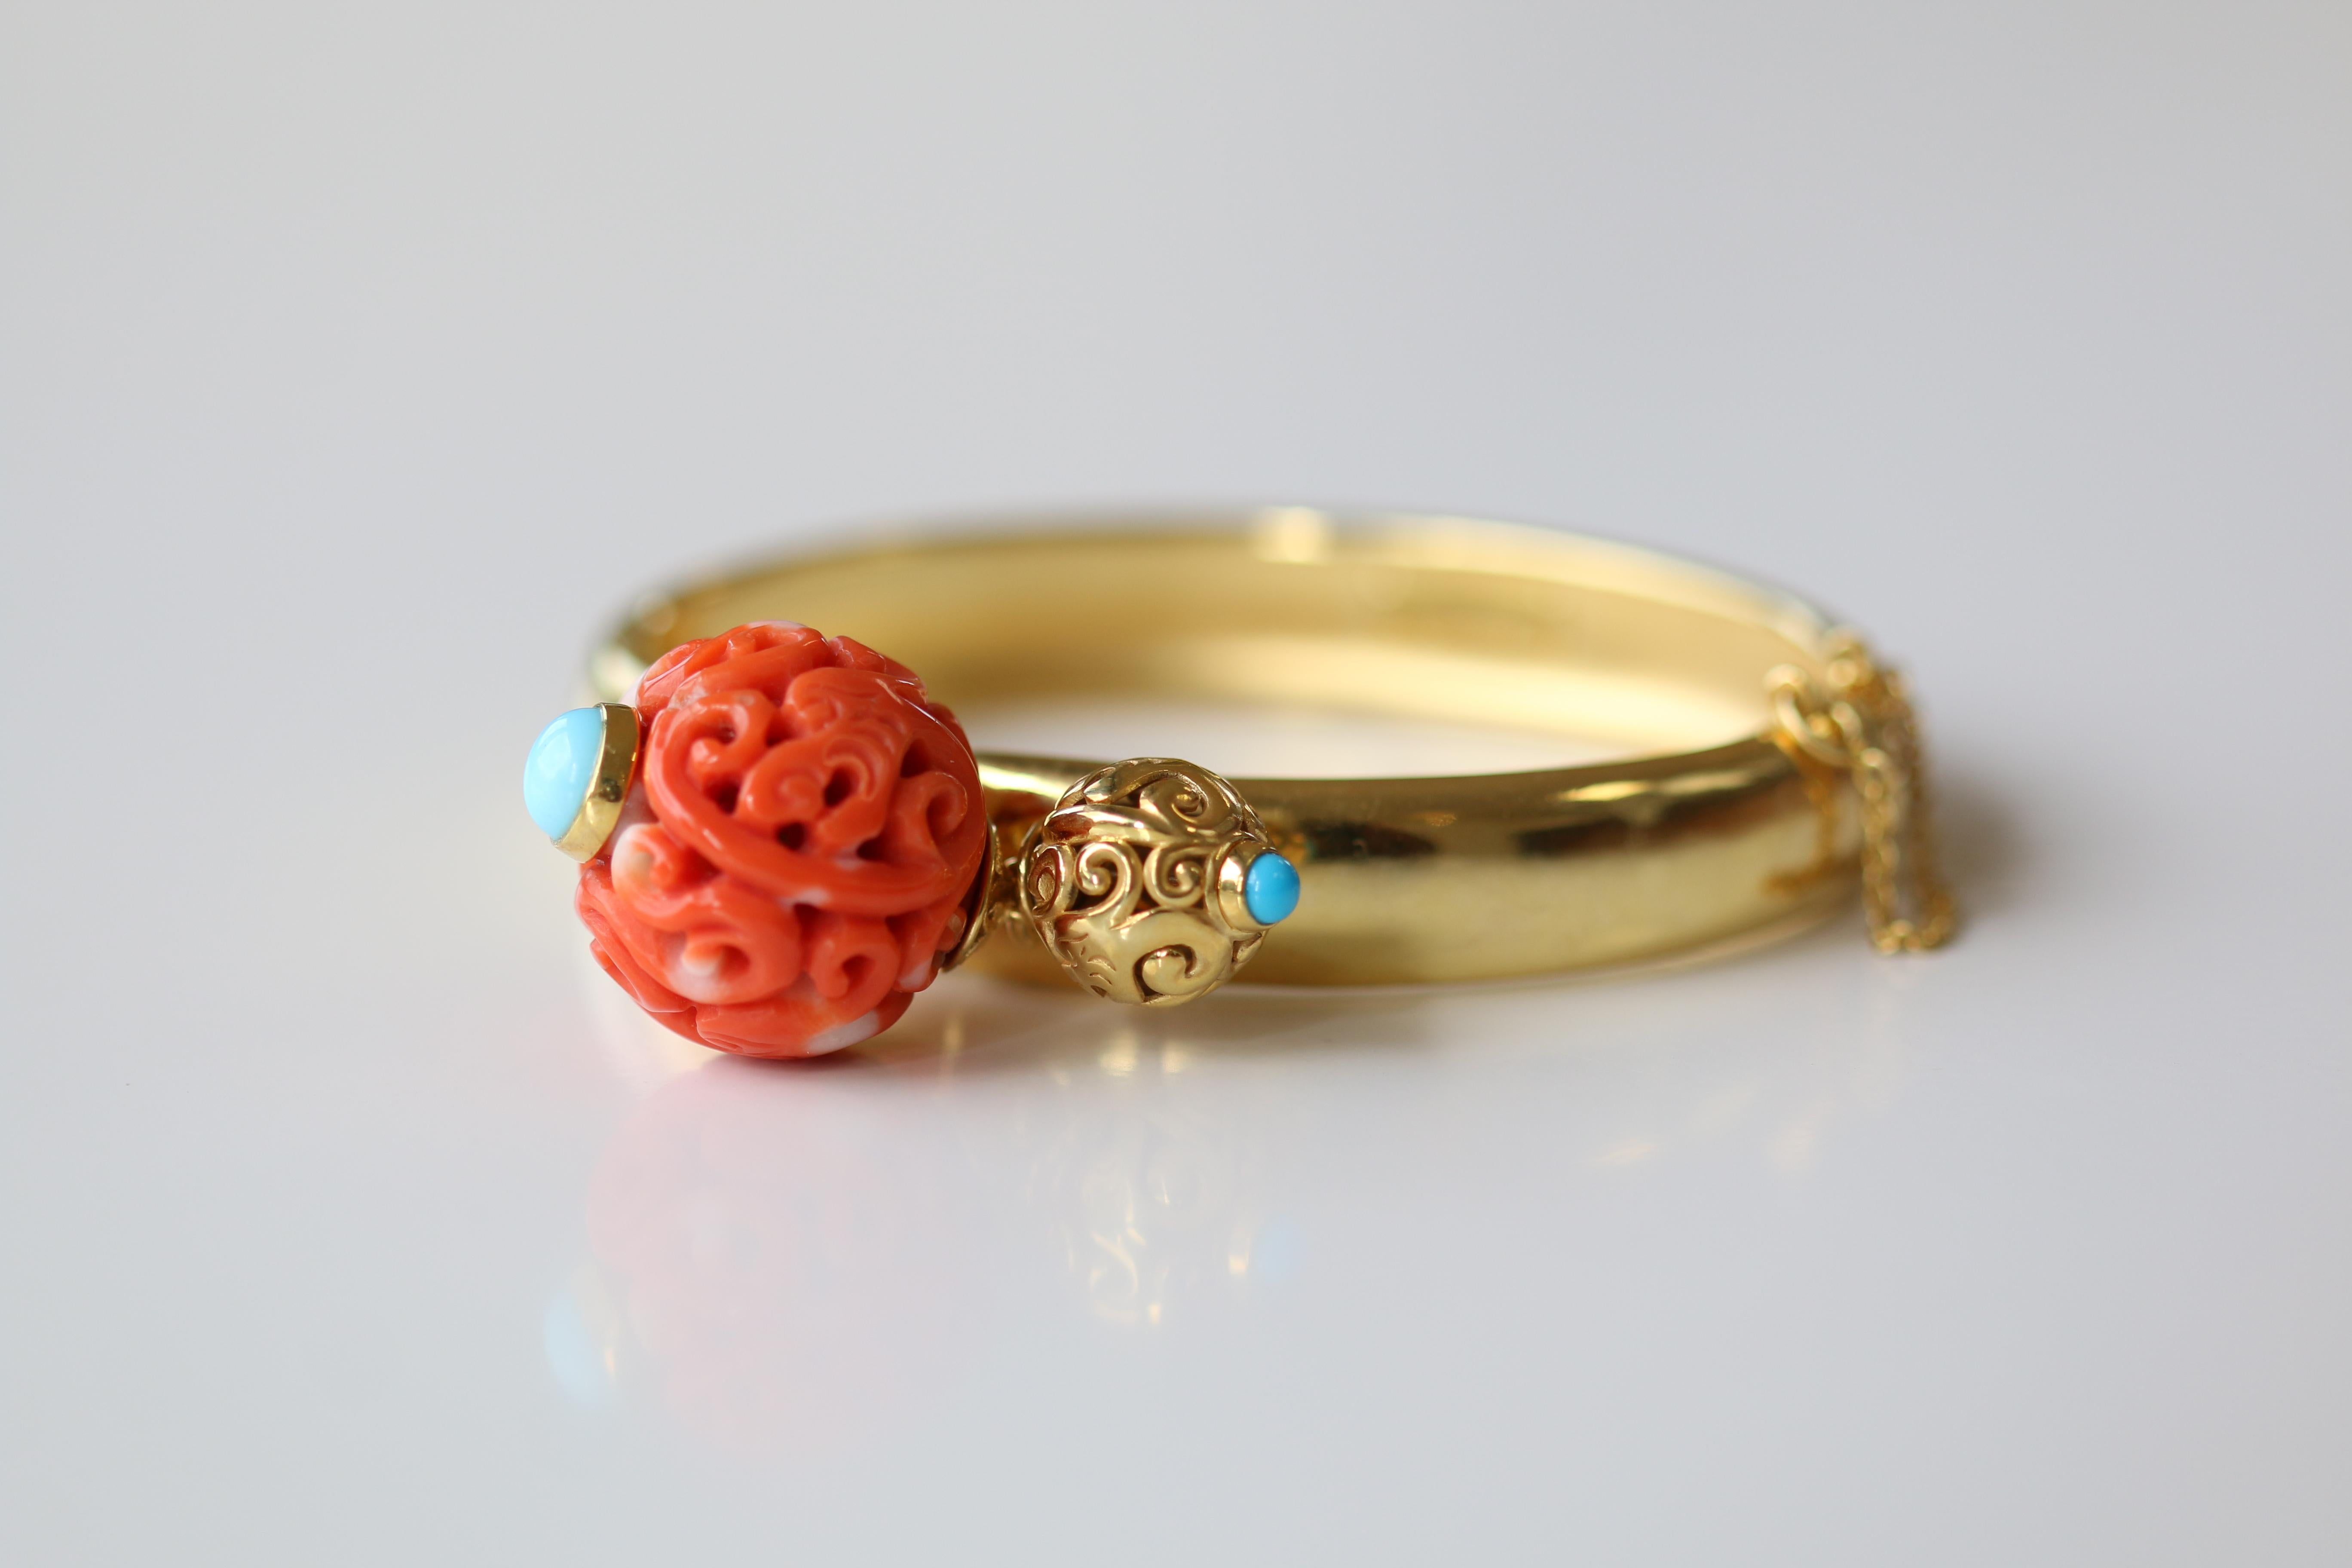 This bangle has been made with an antique Qing dynasty Chinese carved coral bead. The bead is intricate in its design and the swirls give it a wonderful, instantly recognisable,  Oriental feel. Next to the coral bead is a gold one, moulded in the